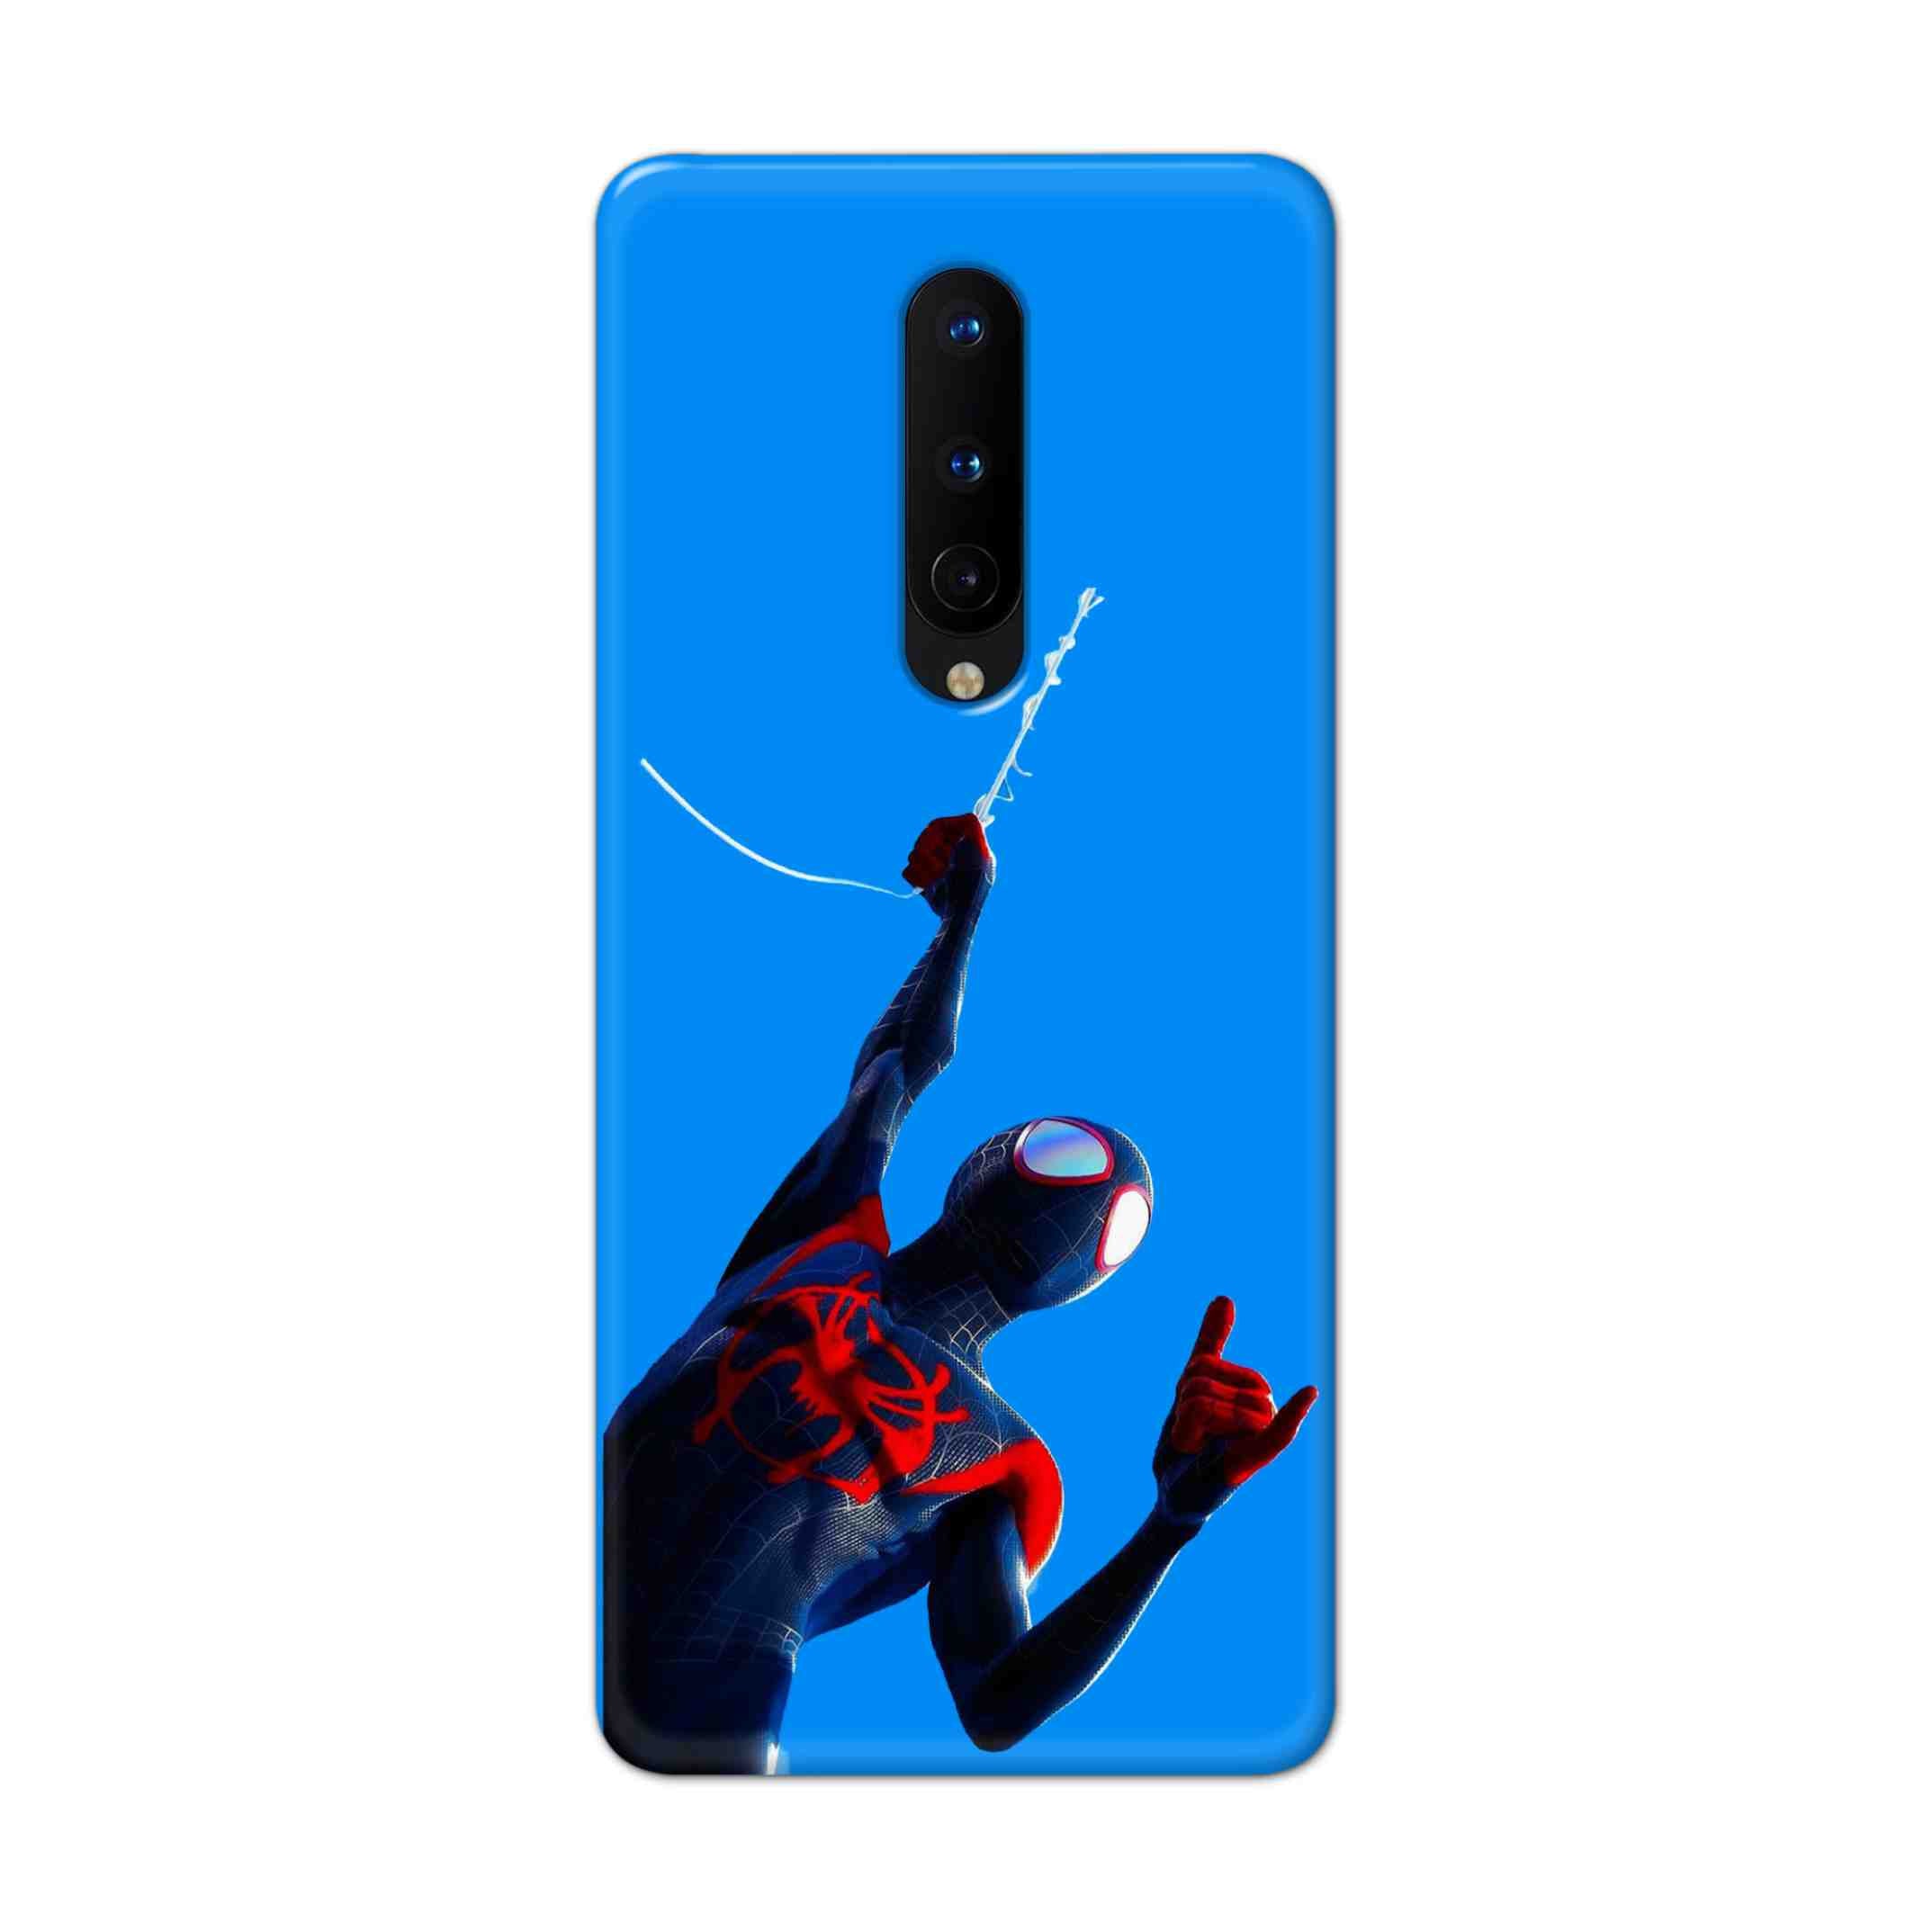 Buy Miles Morales Spiderman Hard Back Mobile Phone Case Cover For OnePlus 8 Online